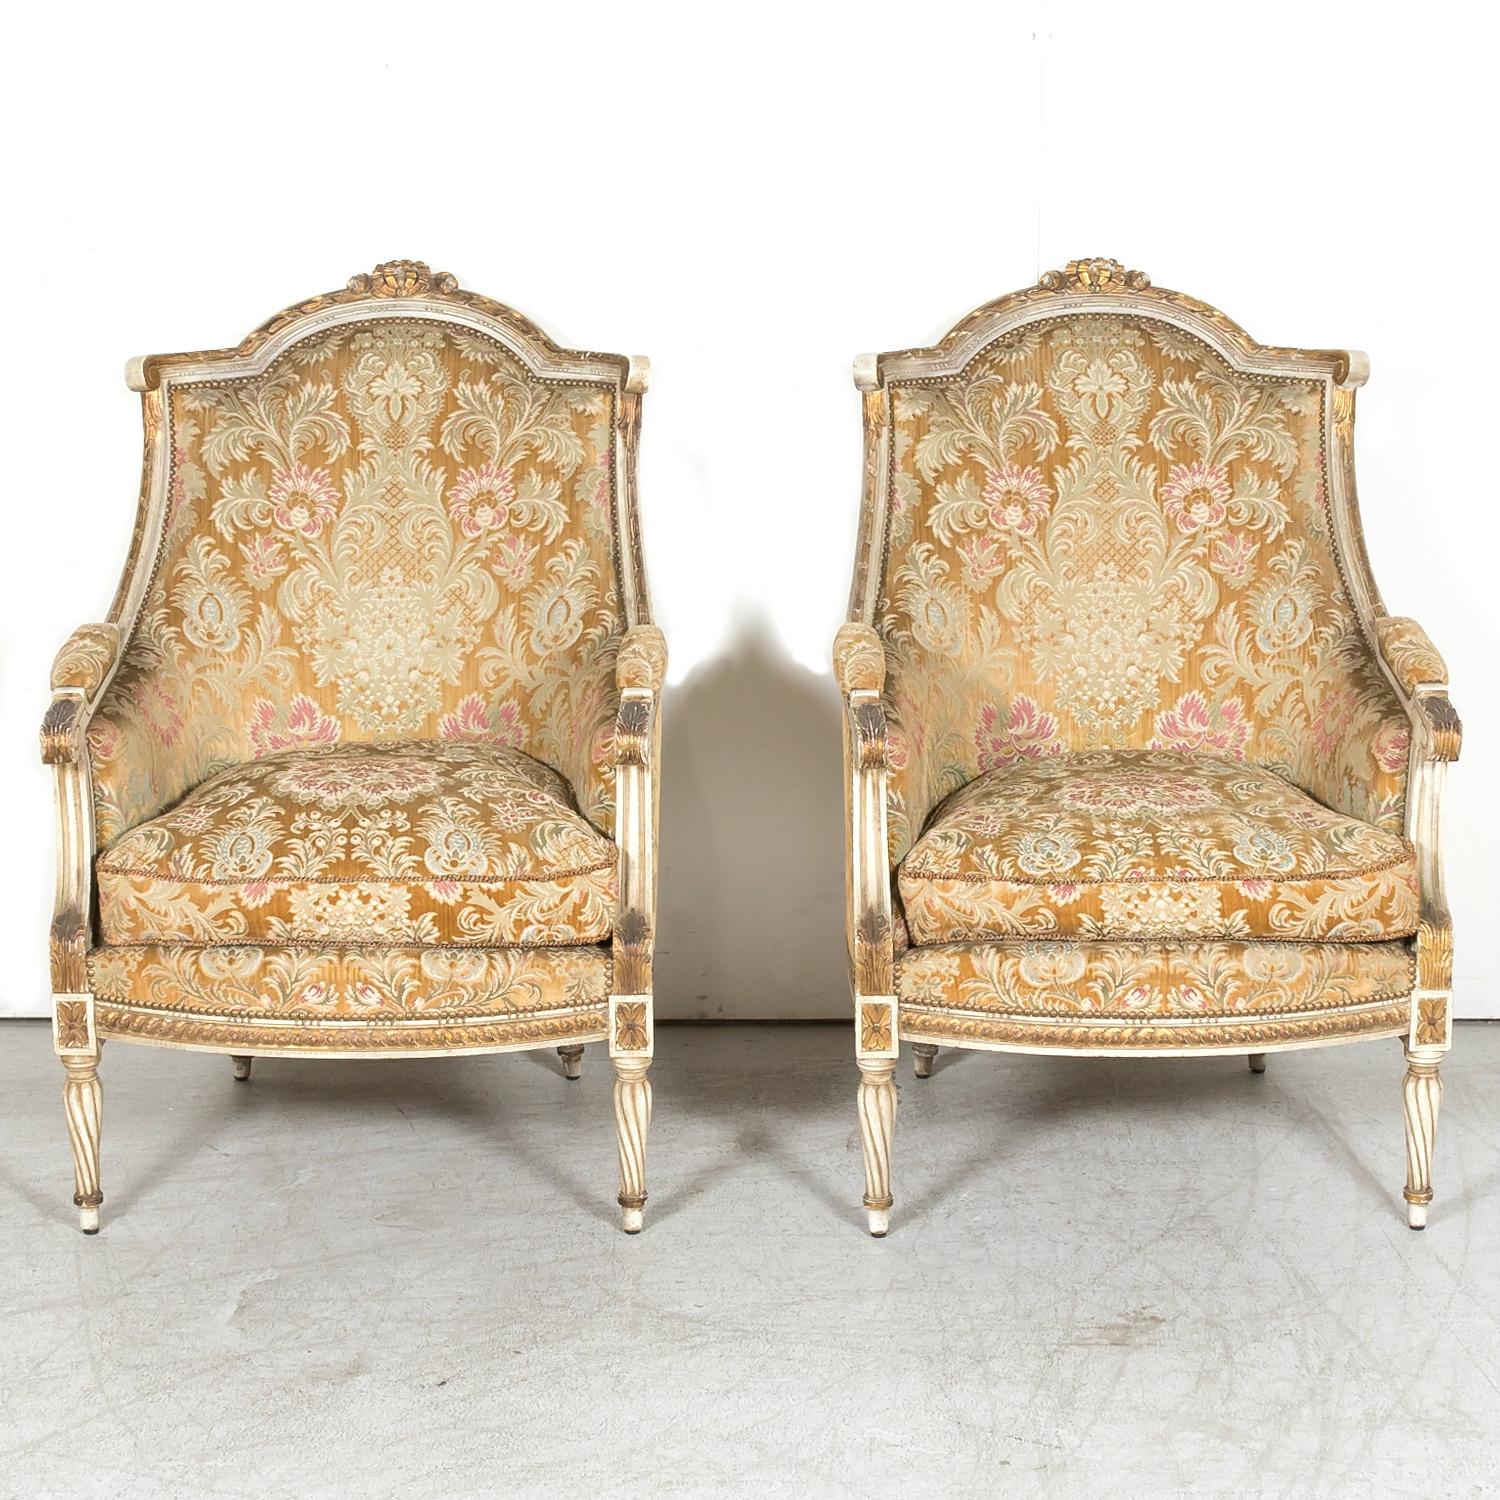 A beautiful pair of early 20th century French Louis XVI style bergère chairs with loose seat down filled cushions and nail head trim handcrafted in Paris and attributed to the distinguished French atelier, Maison Jansen, circa 1920s. Having timeless